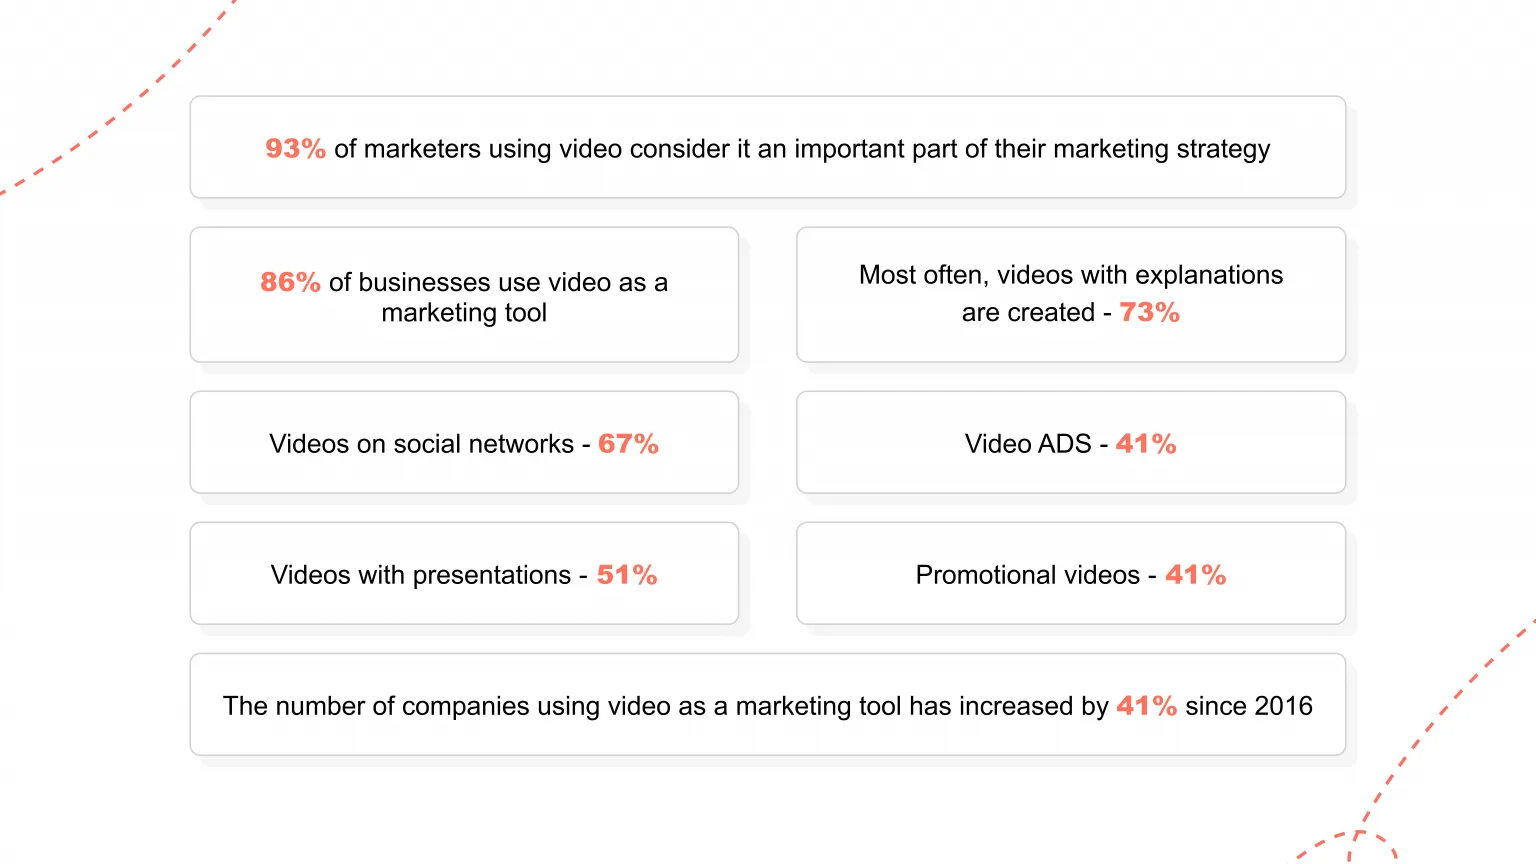 statistic about video marketing strategy